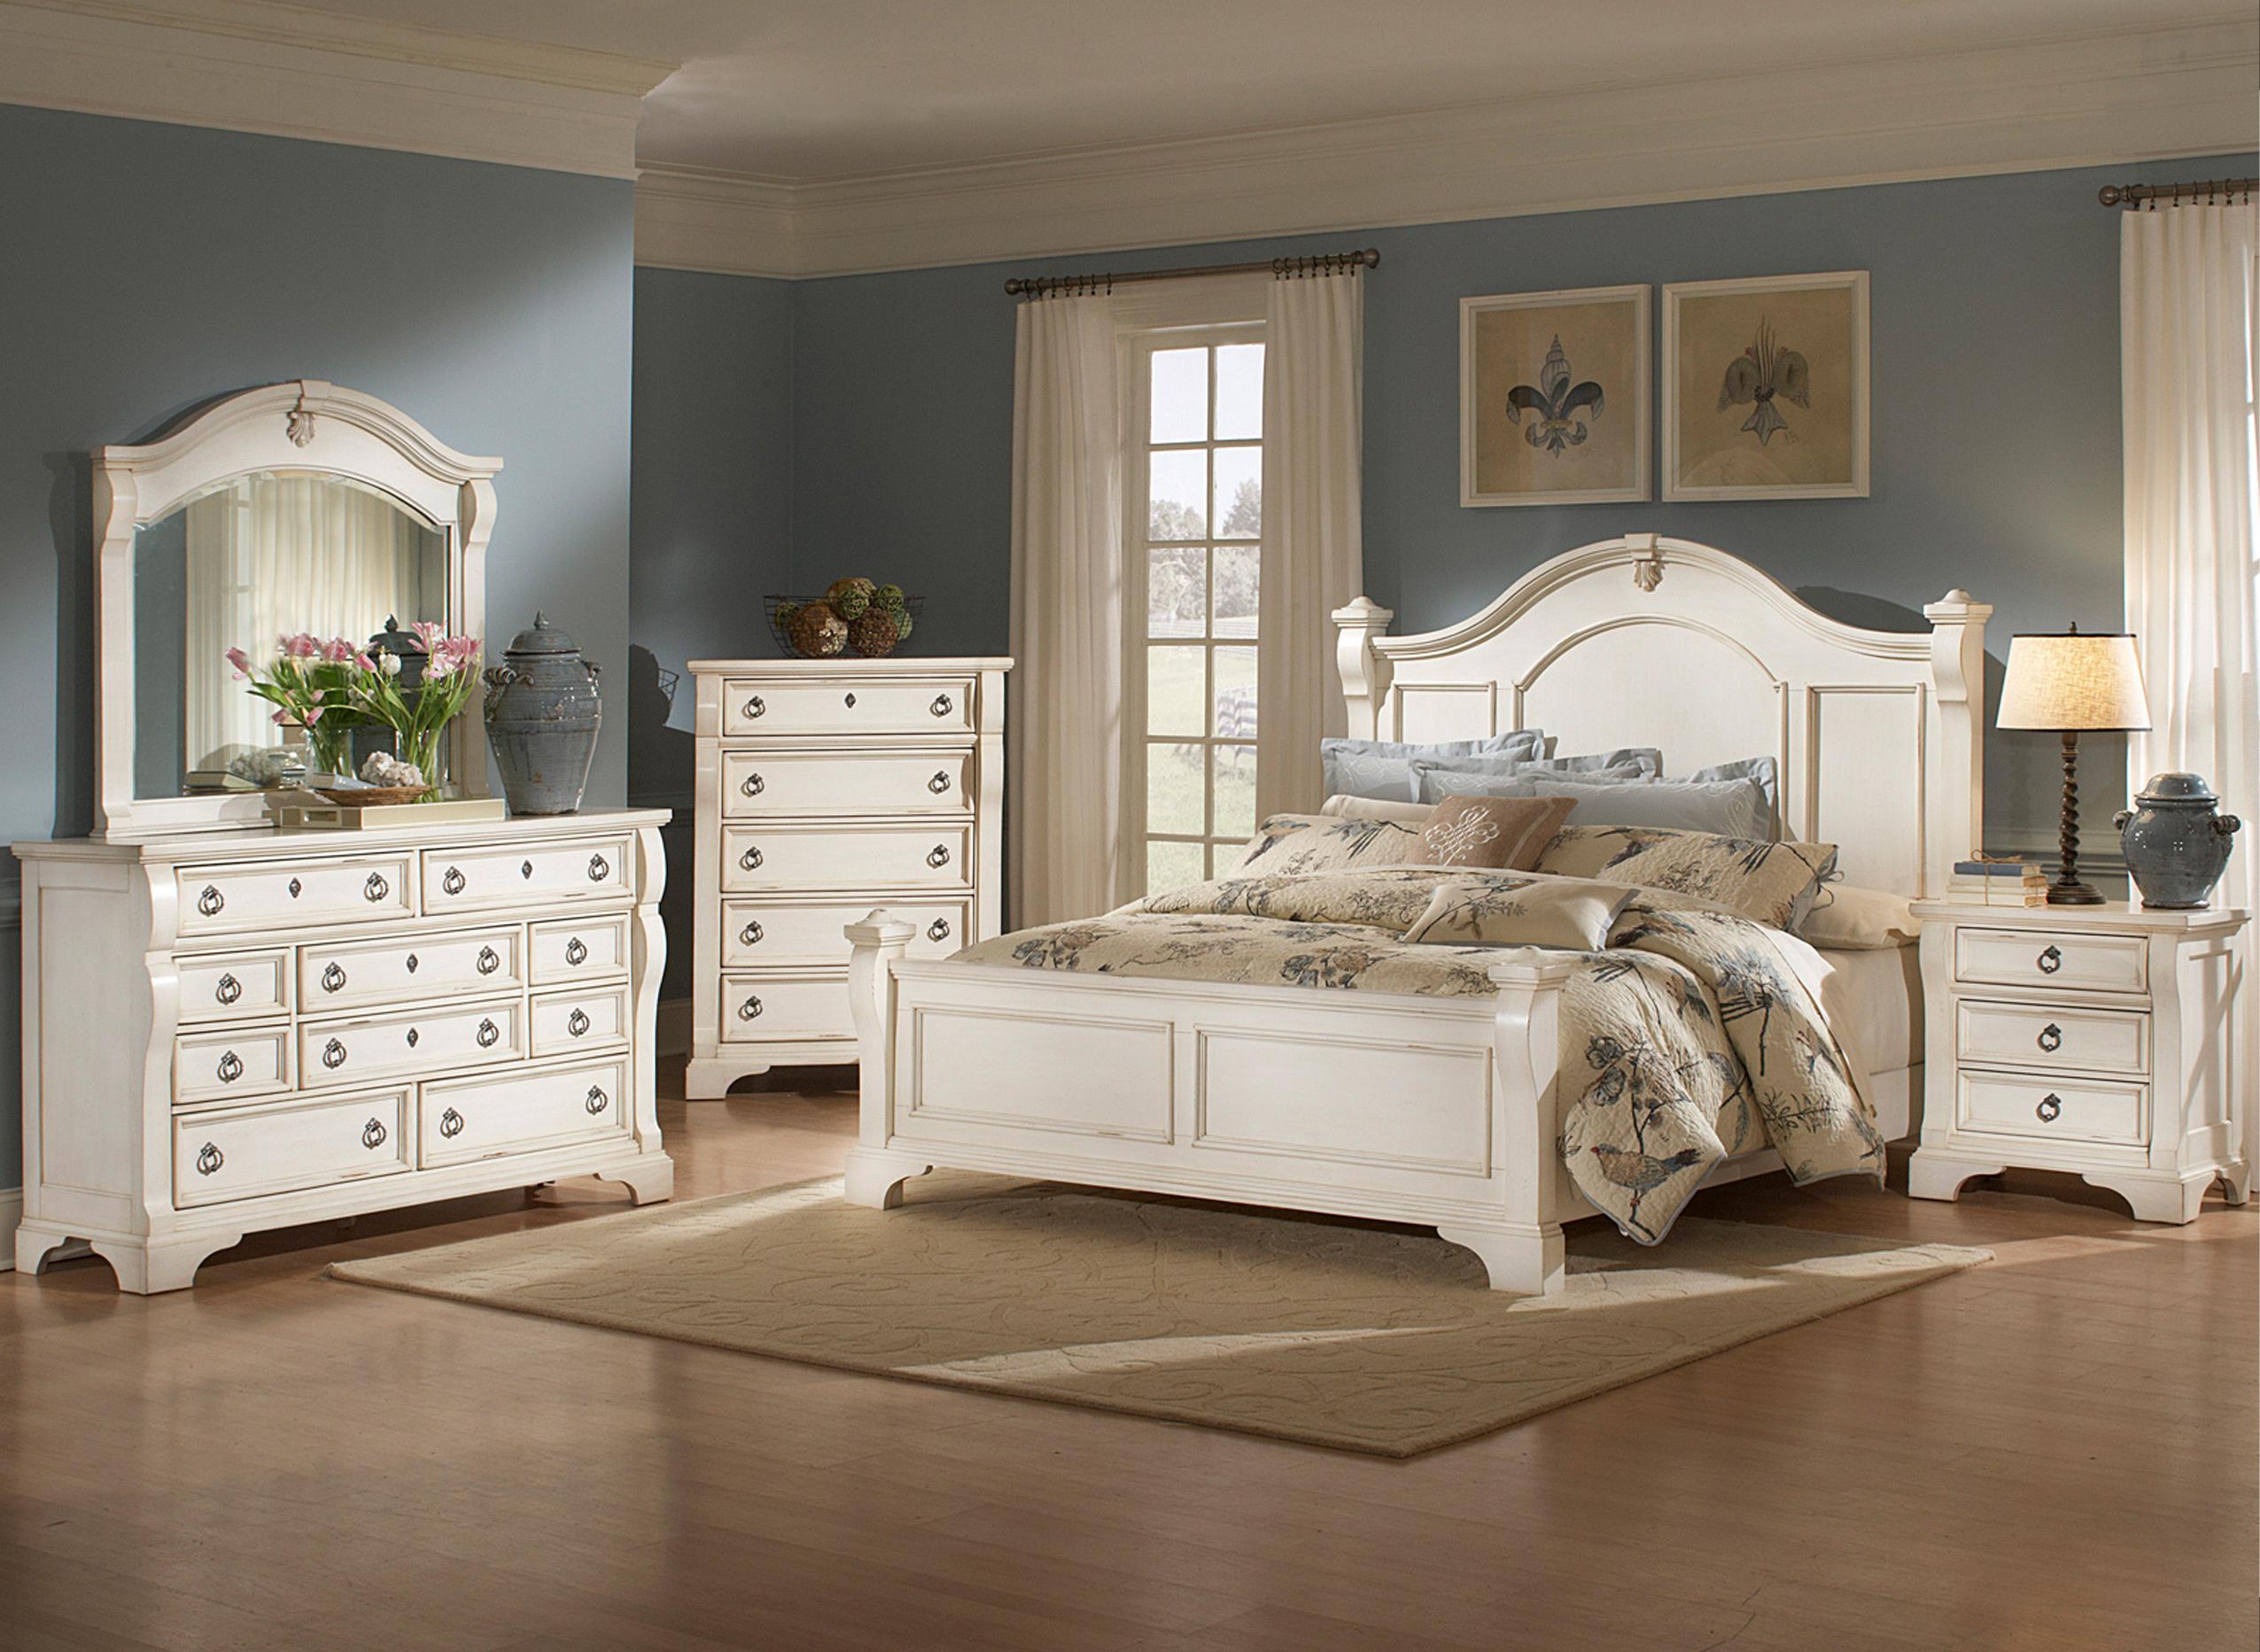 

    
American Woodcrafters HEIRLOOM 2910-50POS Poster Bed White 2910-50POS
